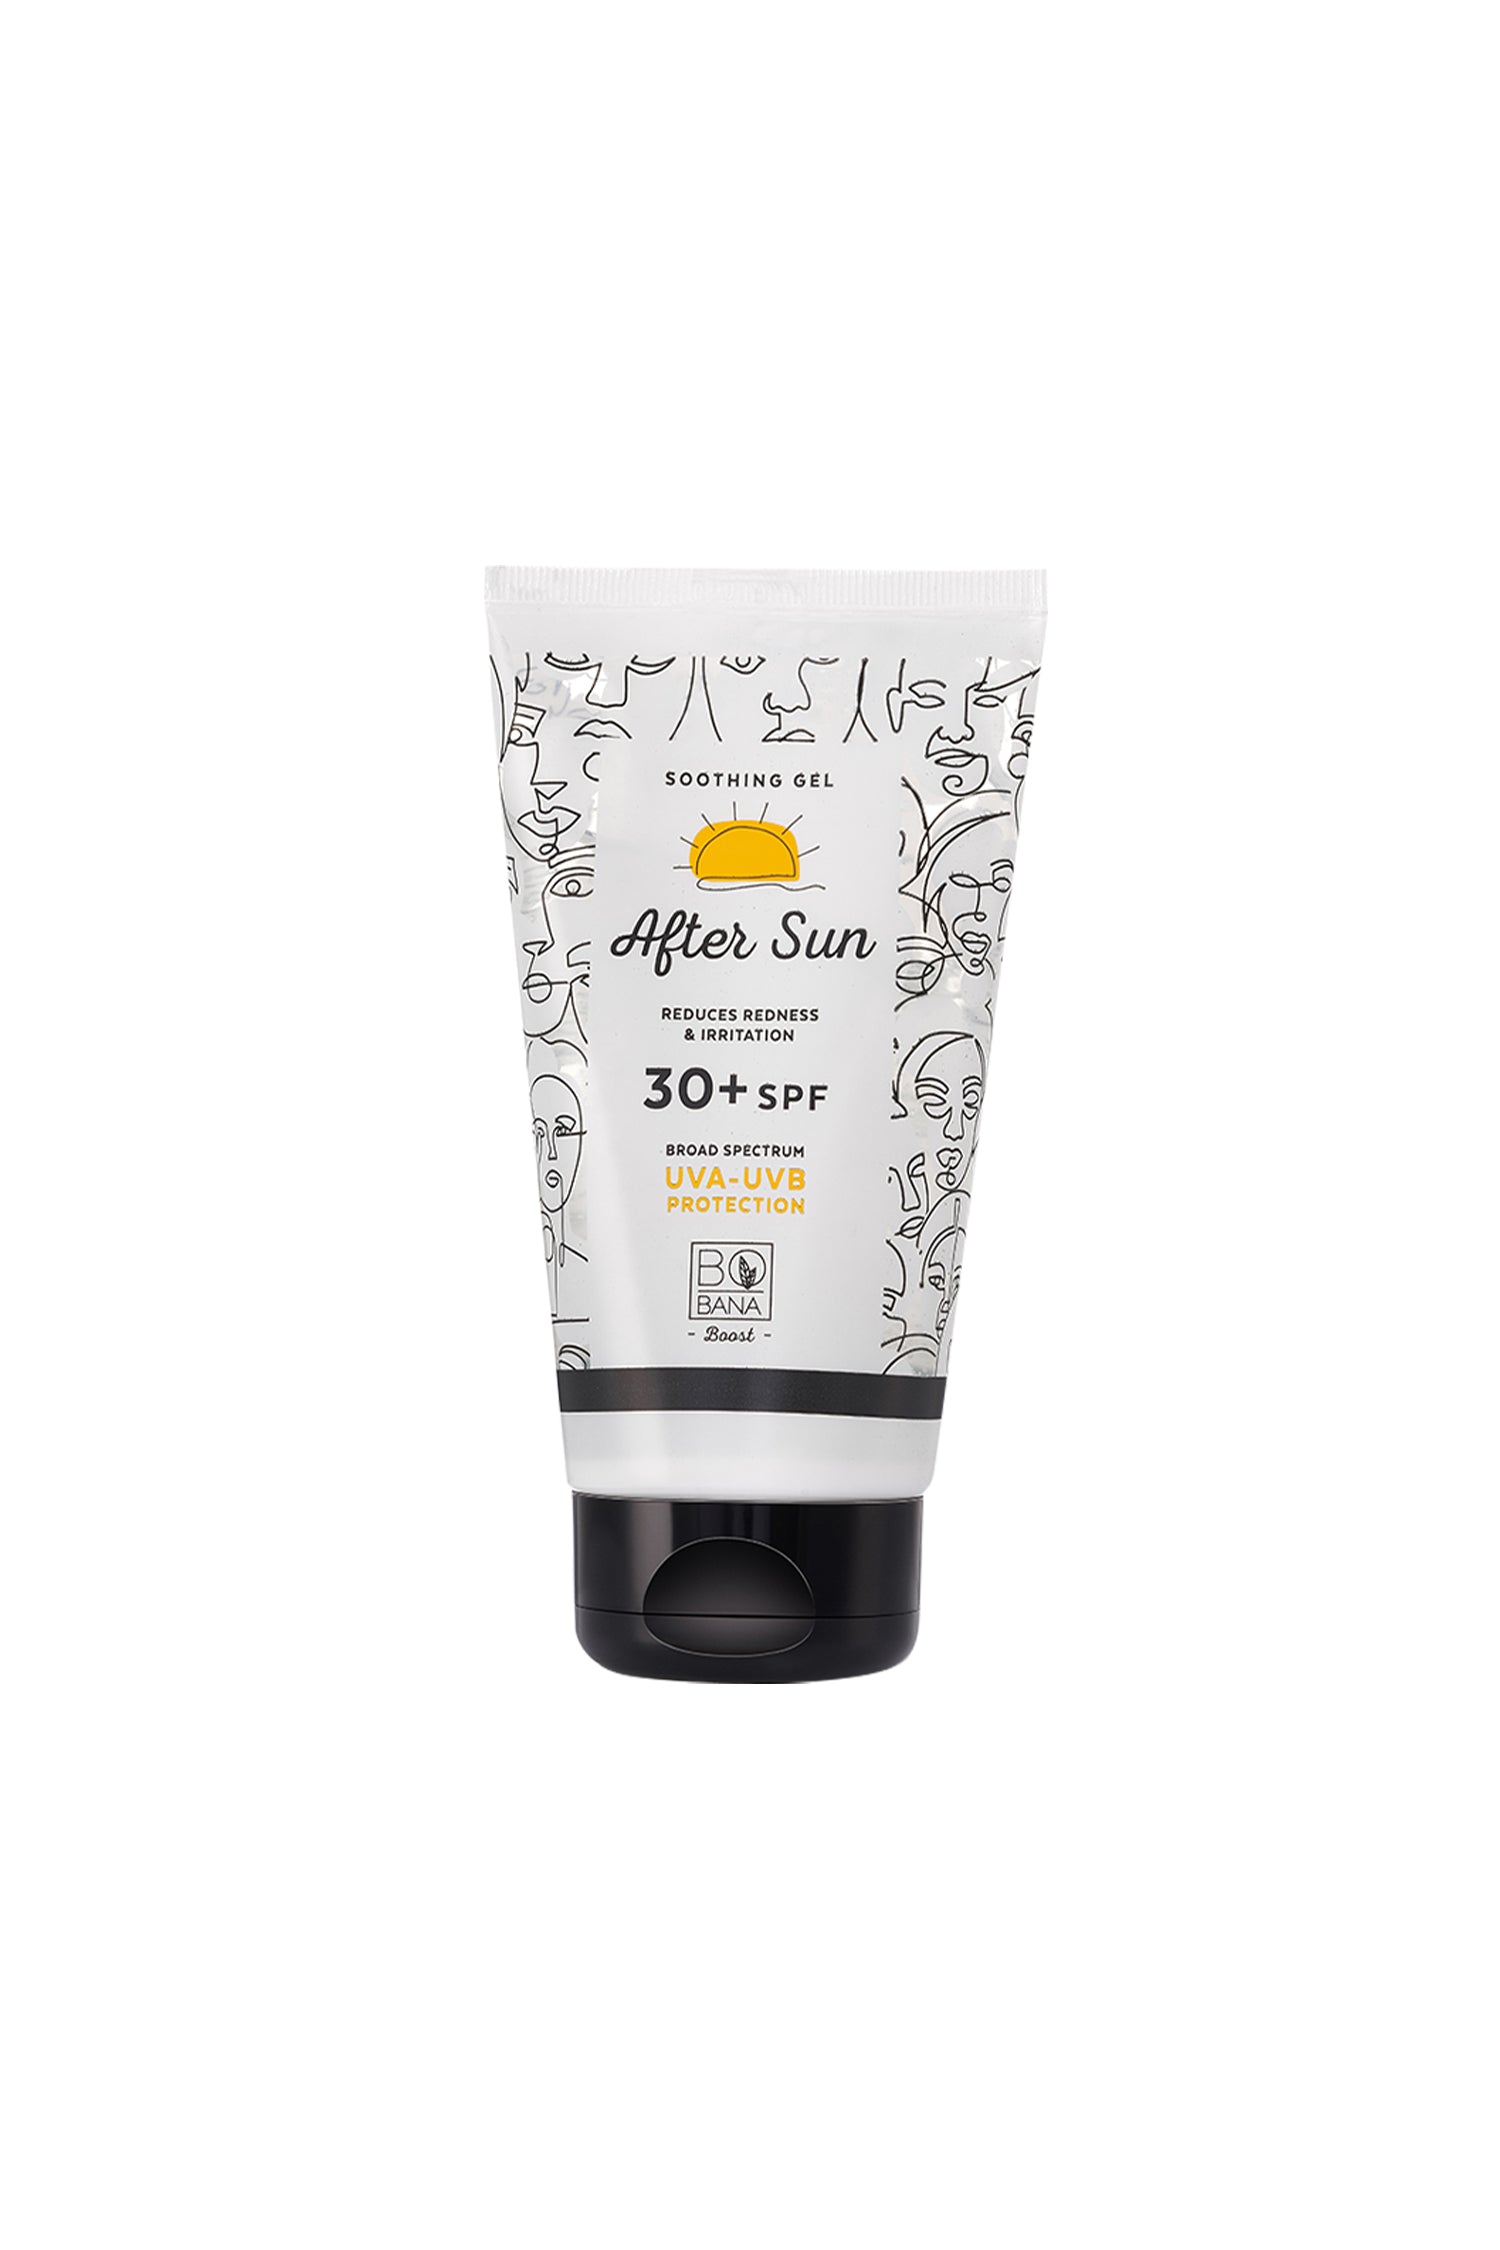 After Sun Soothing Gel - SPF30+